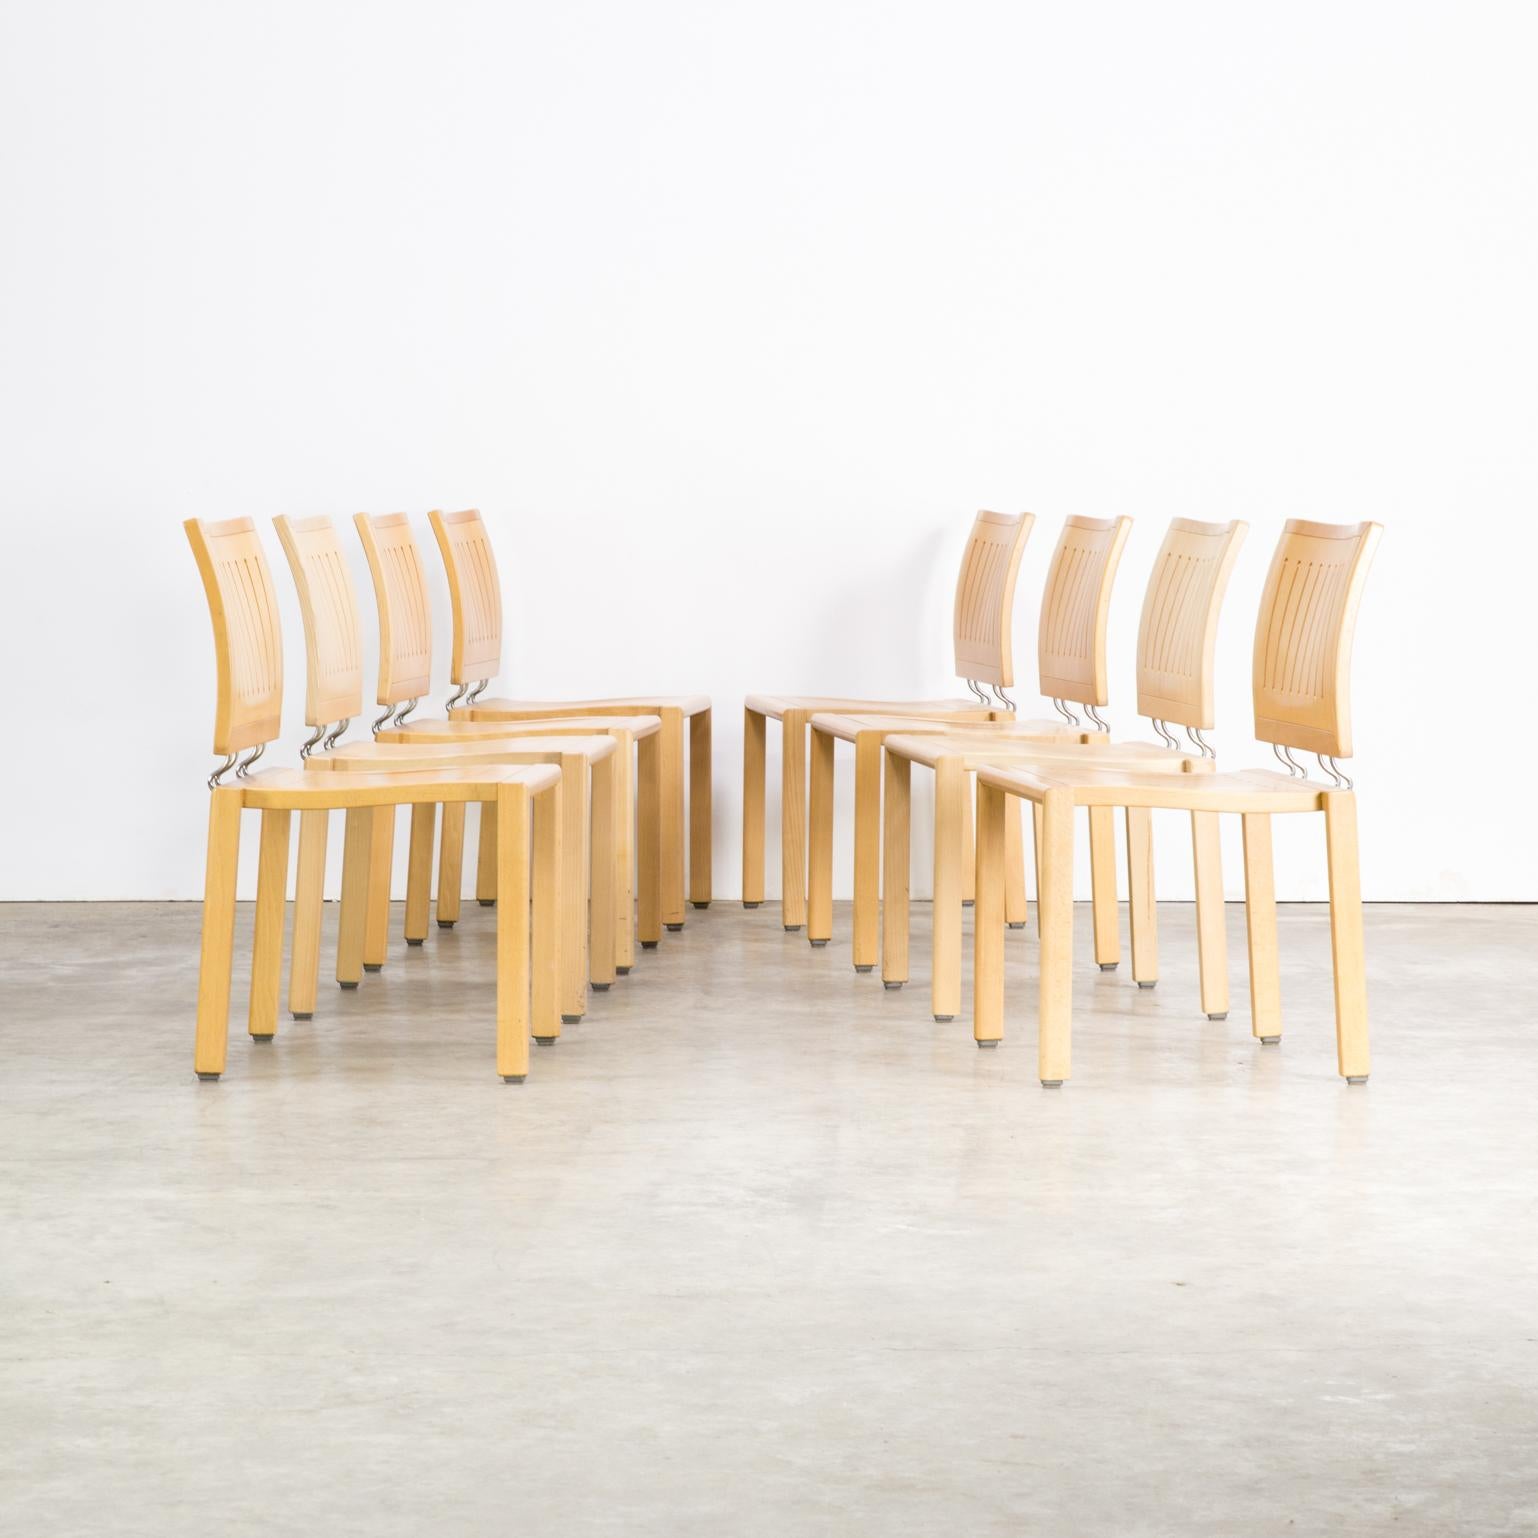 Bruno Rey & Charles Polin “Quadro W” dining chair for Dietiker, set of 8. One set of 8 dining chairs, beautiful design, rare, laminated wood, strong and stackable. Good condition consistent with age and use.